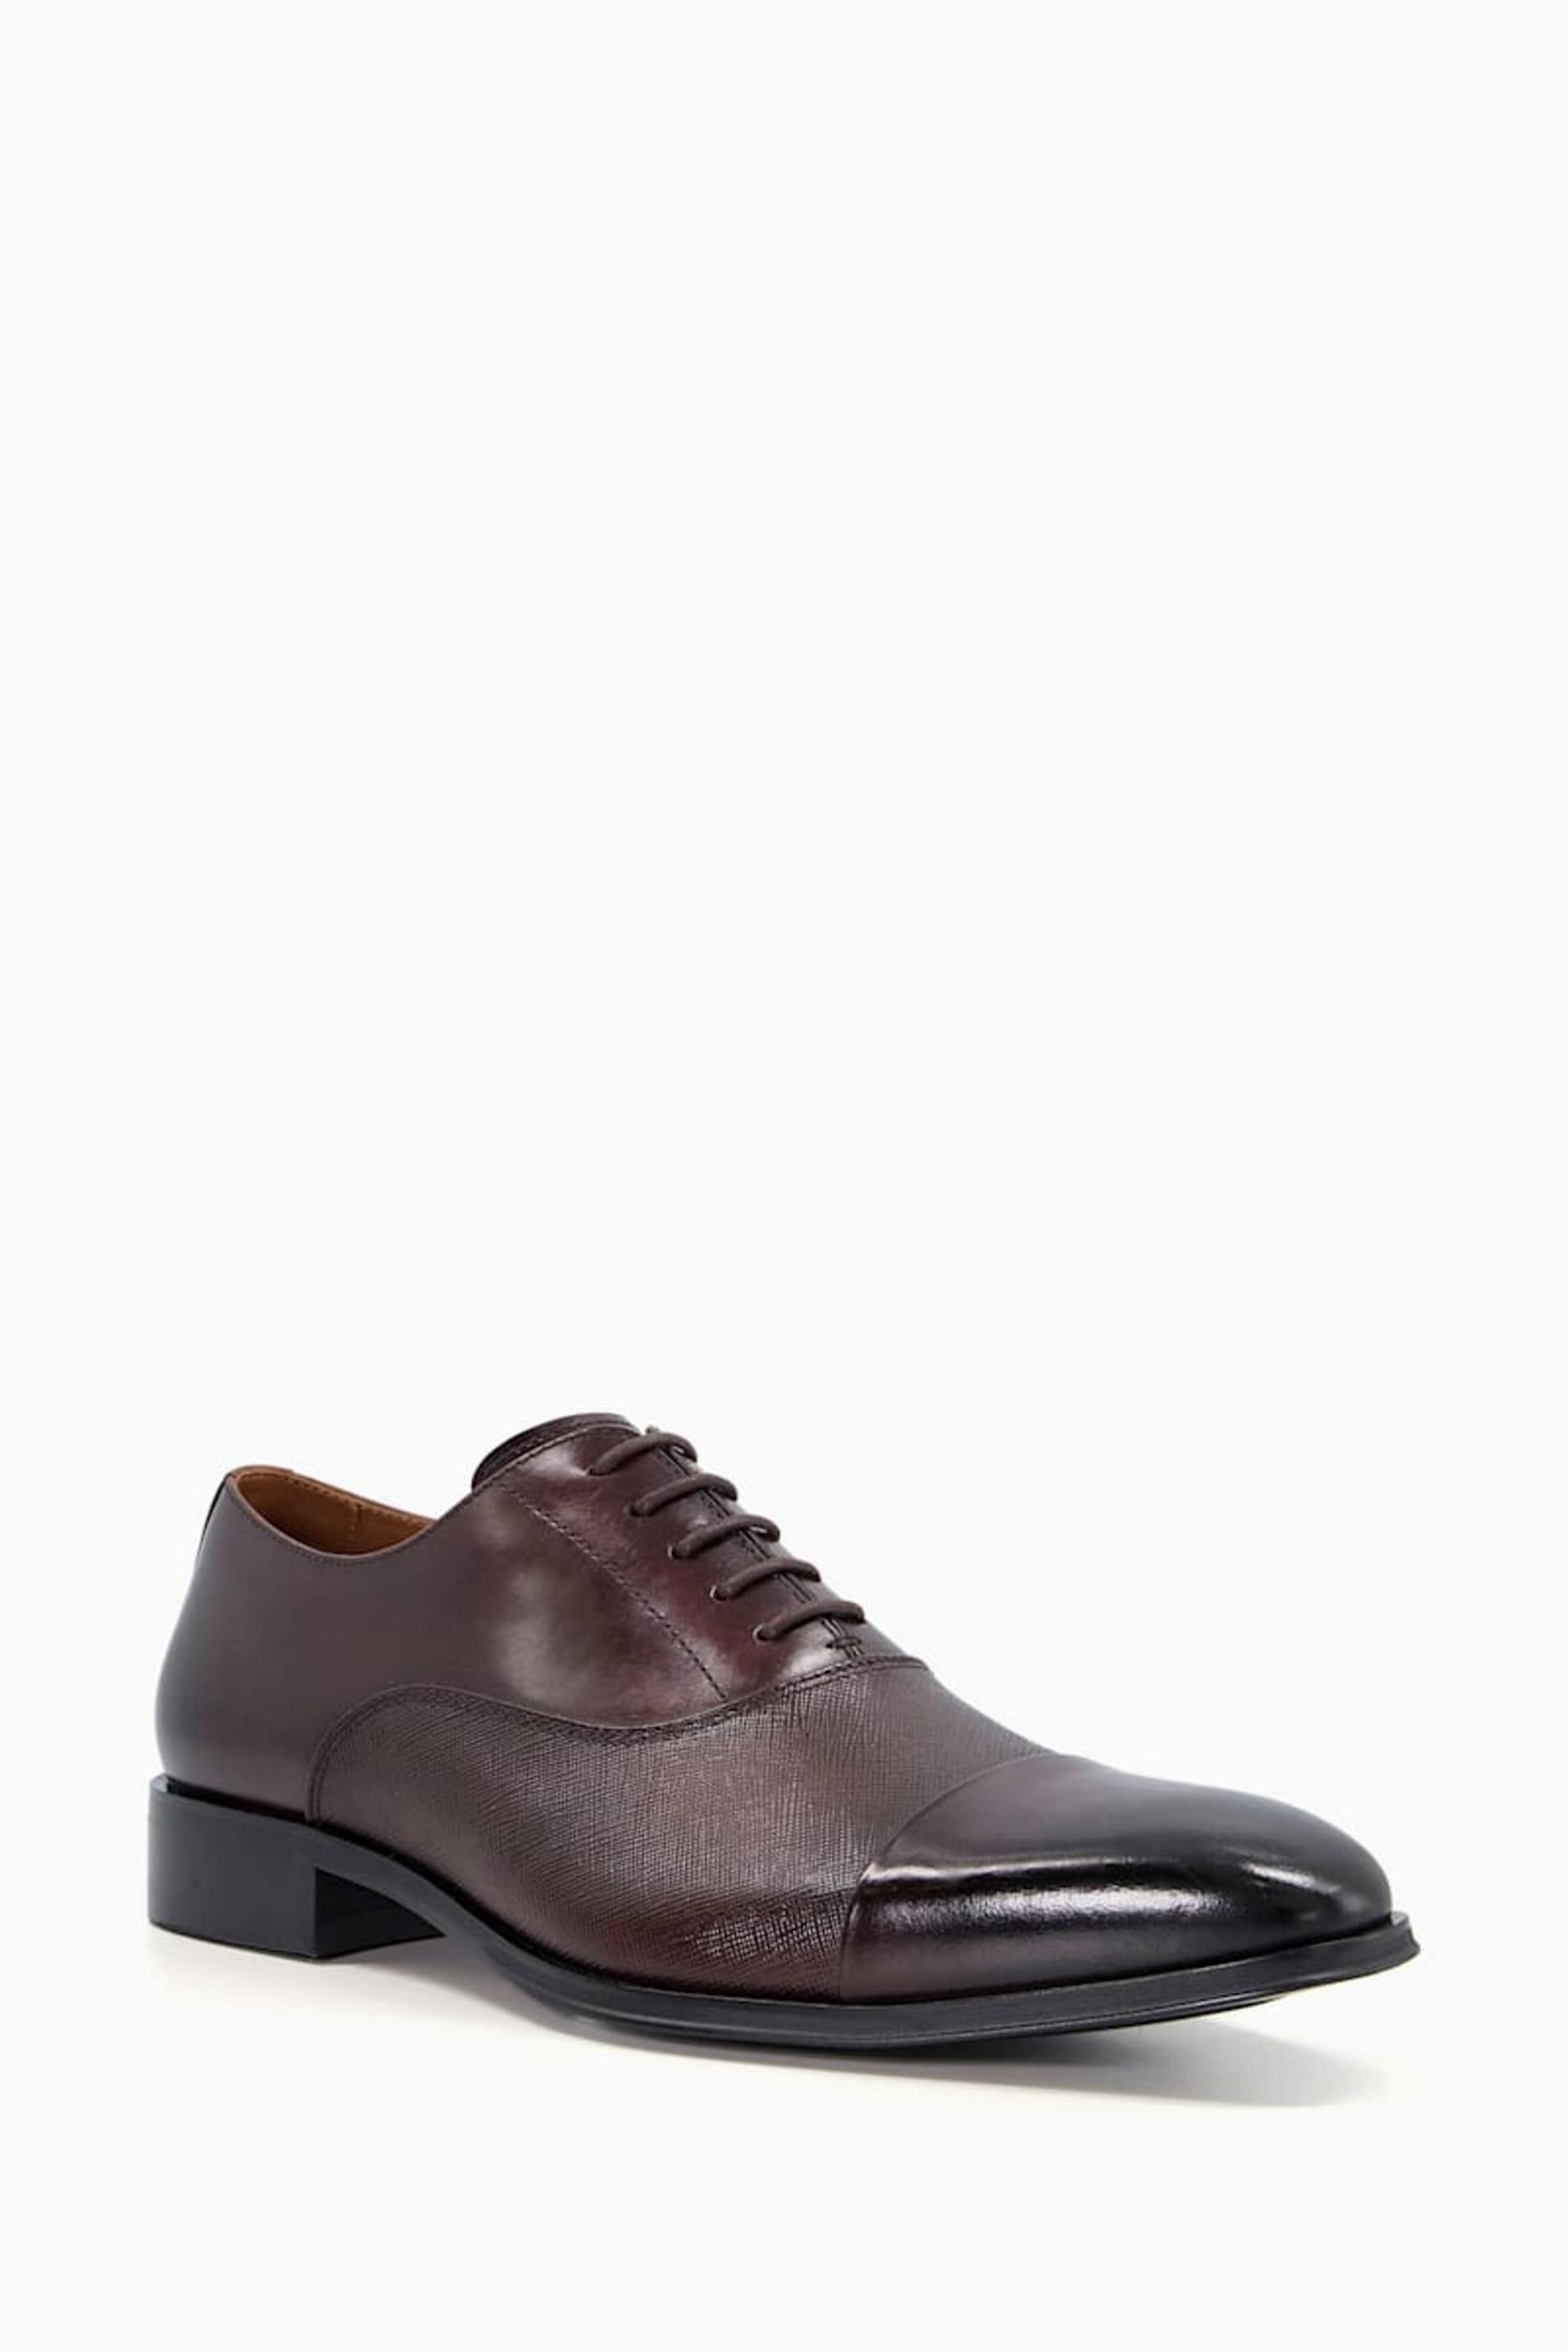 Dune London Brown Sheet Saffiano Embossed Oxford Shoes - Image 3 of 5